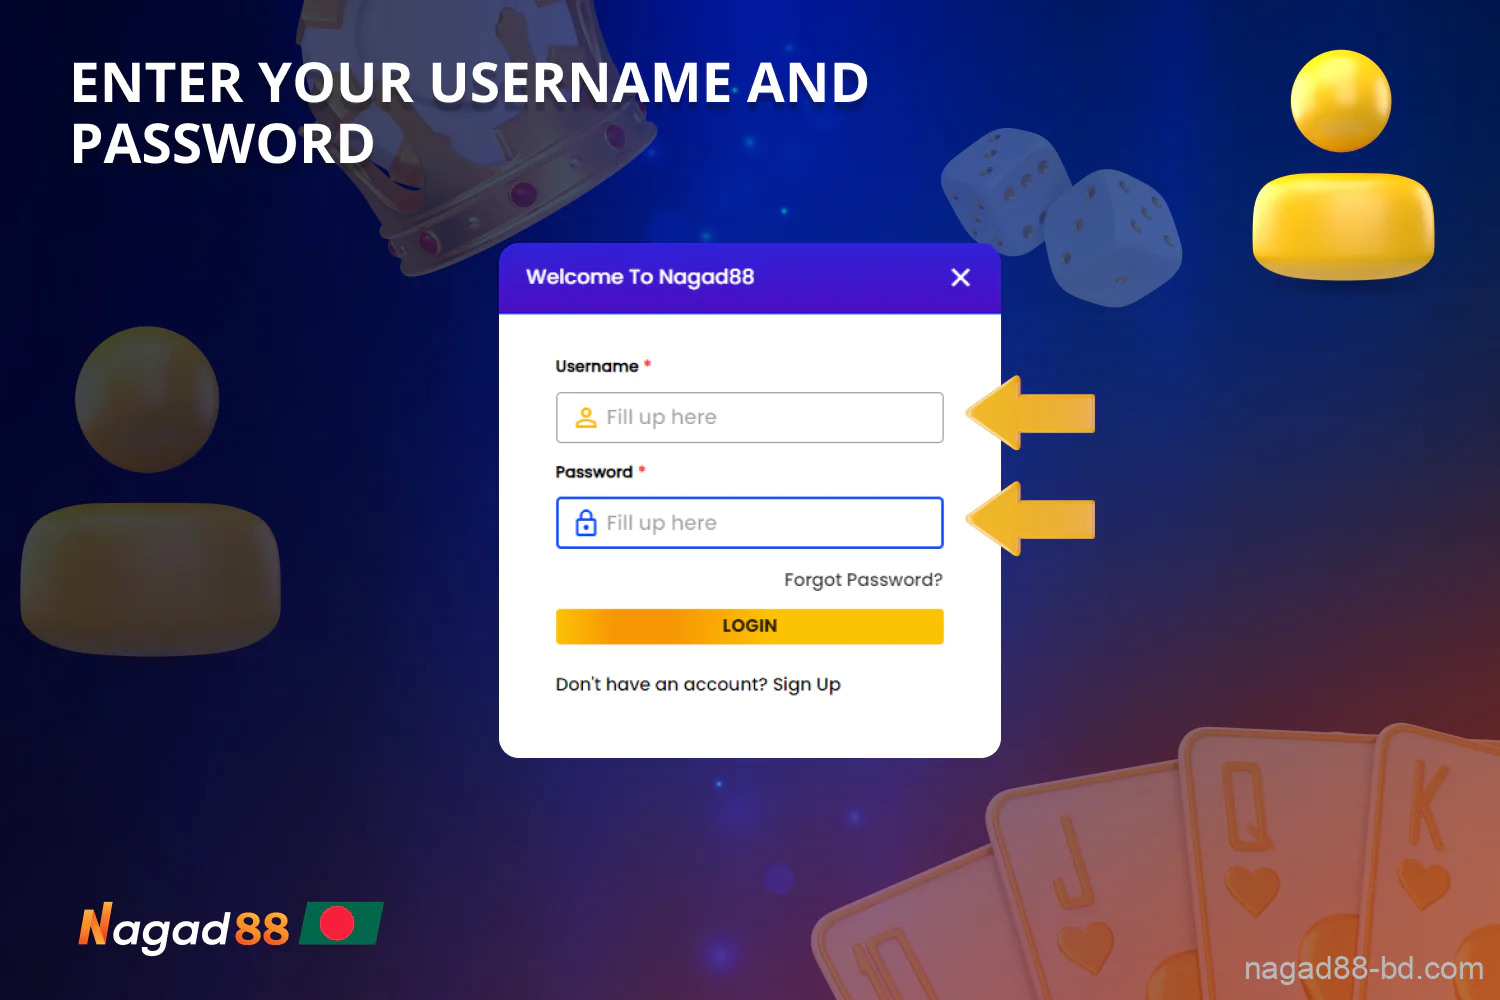 To log into your Nagad88 account, enter the username and password you provided when you registered your account